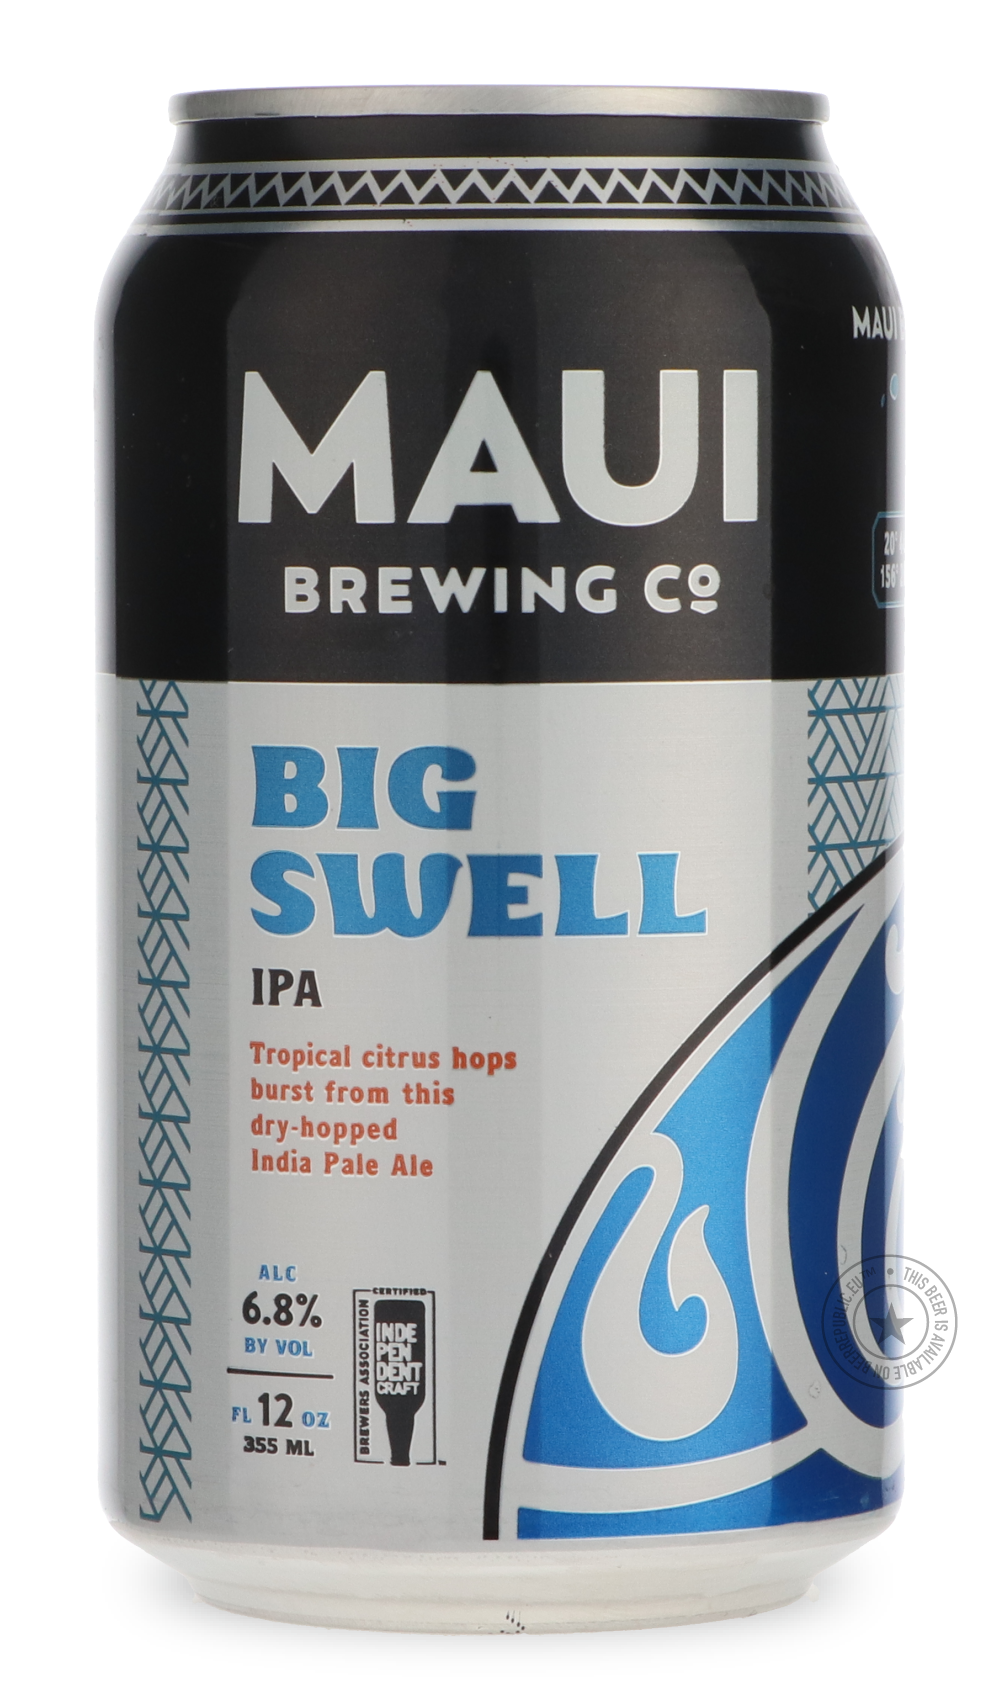 -Maui- Big Swell-IPA- Only @ Beer Republic - The best online beer store for American & Canadian craft beer - Buy beer online from the USA and Canada - Bier online kopen - Amerikaans bier kopen - Craft beer store - Craft beer kopen - Amerikanisch bier kaufen - Bier online kaufen - Acheter biere online - IPA - Stout - Porter - New England IPA - Hazy IPA - Imperial Stout - Barrel Aged - Barrel Aged Imperial Stout - Brown - Dark beer - Blond - Blonde - Pilsner - Lager - Wheat - Weizen - Amber - Barley Wine - Qu